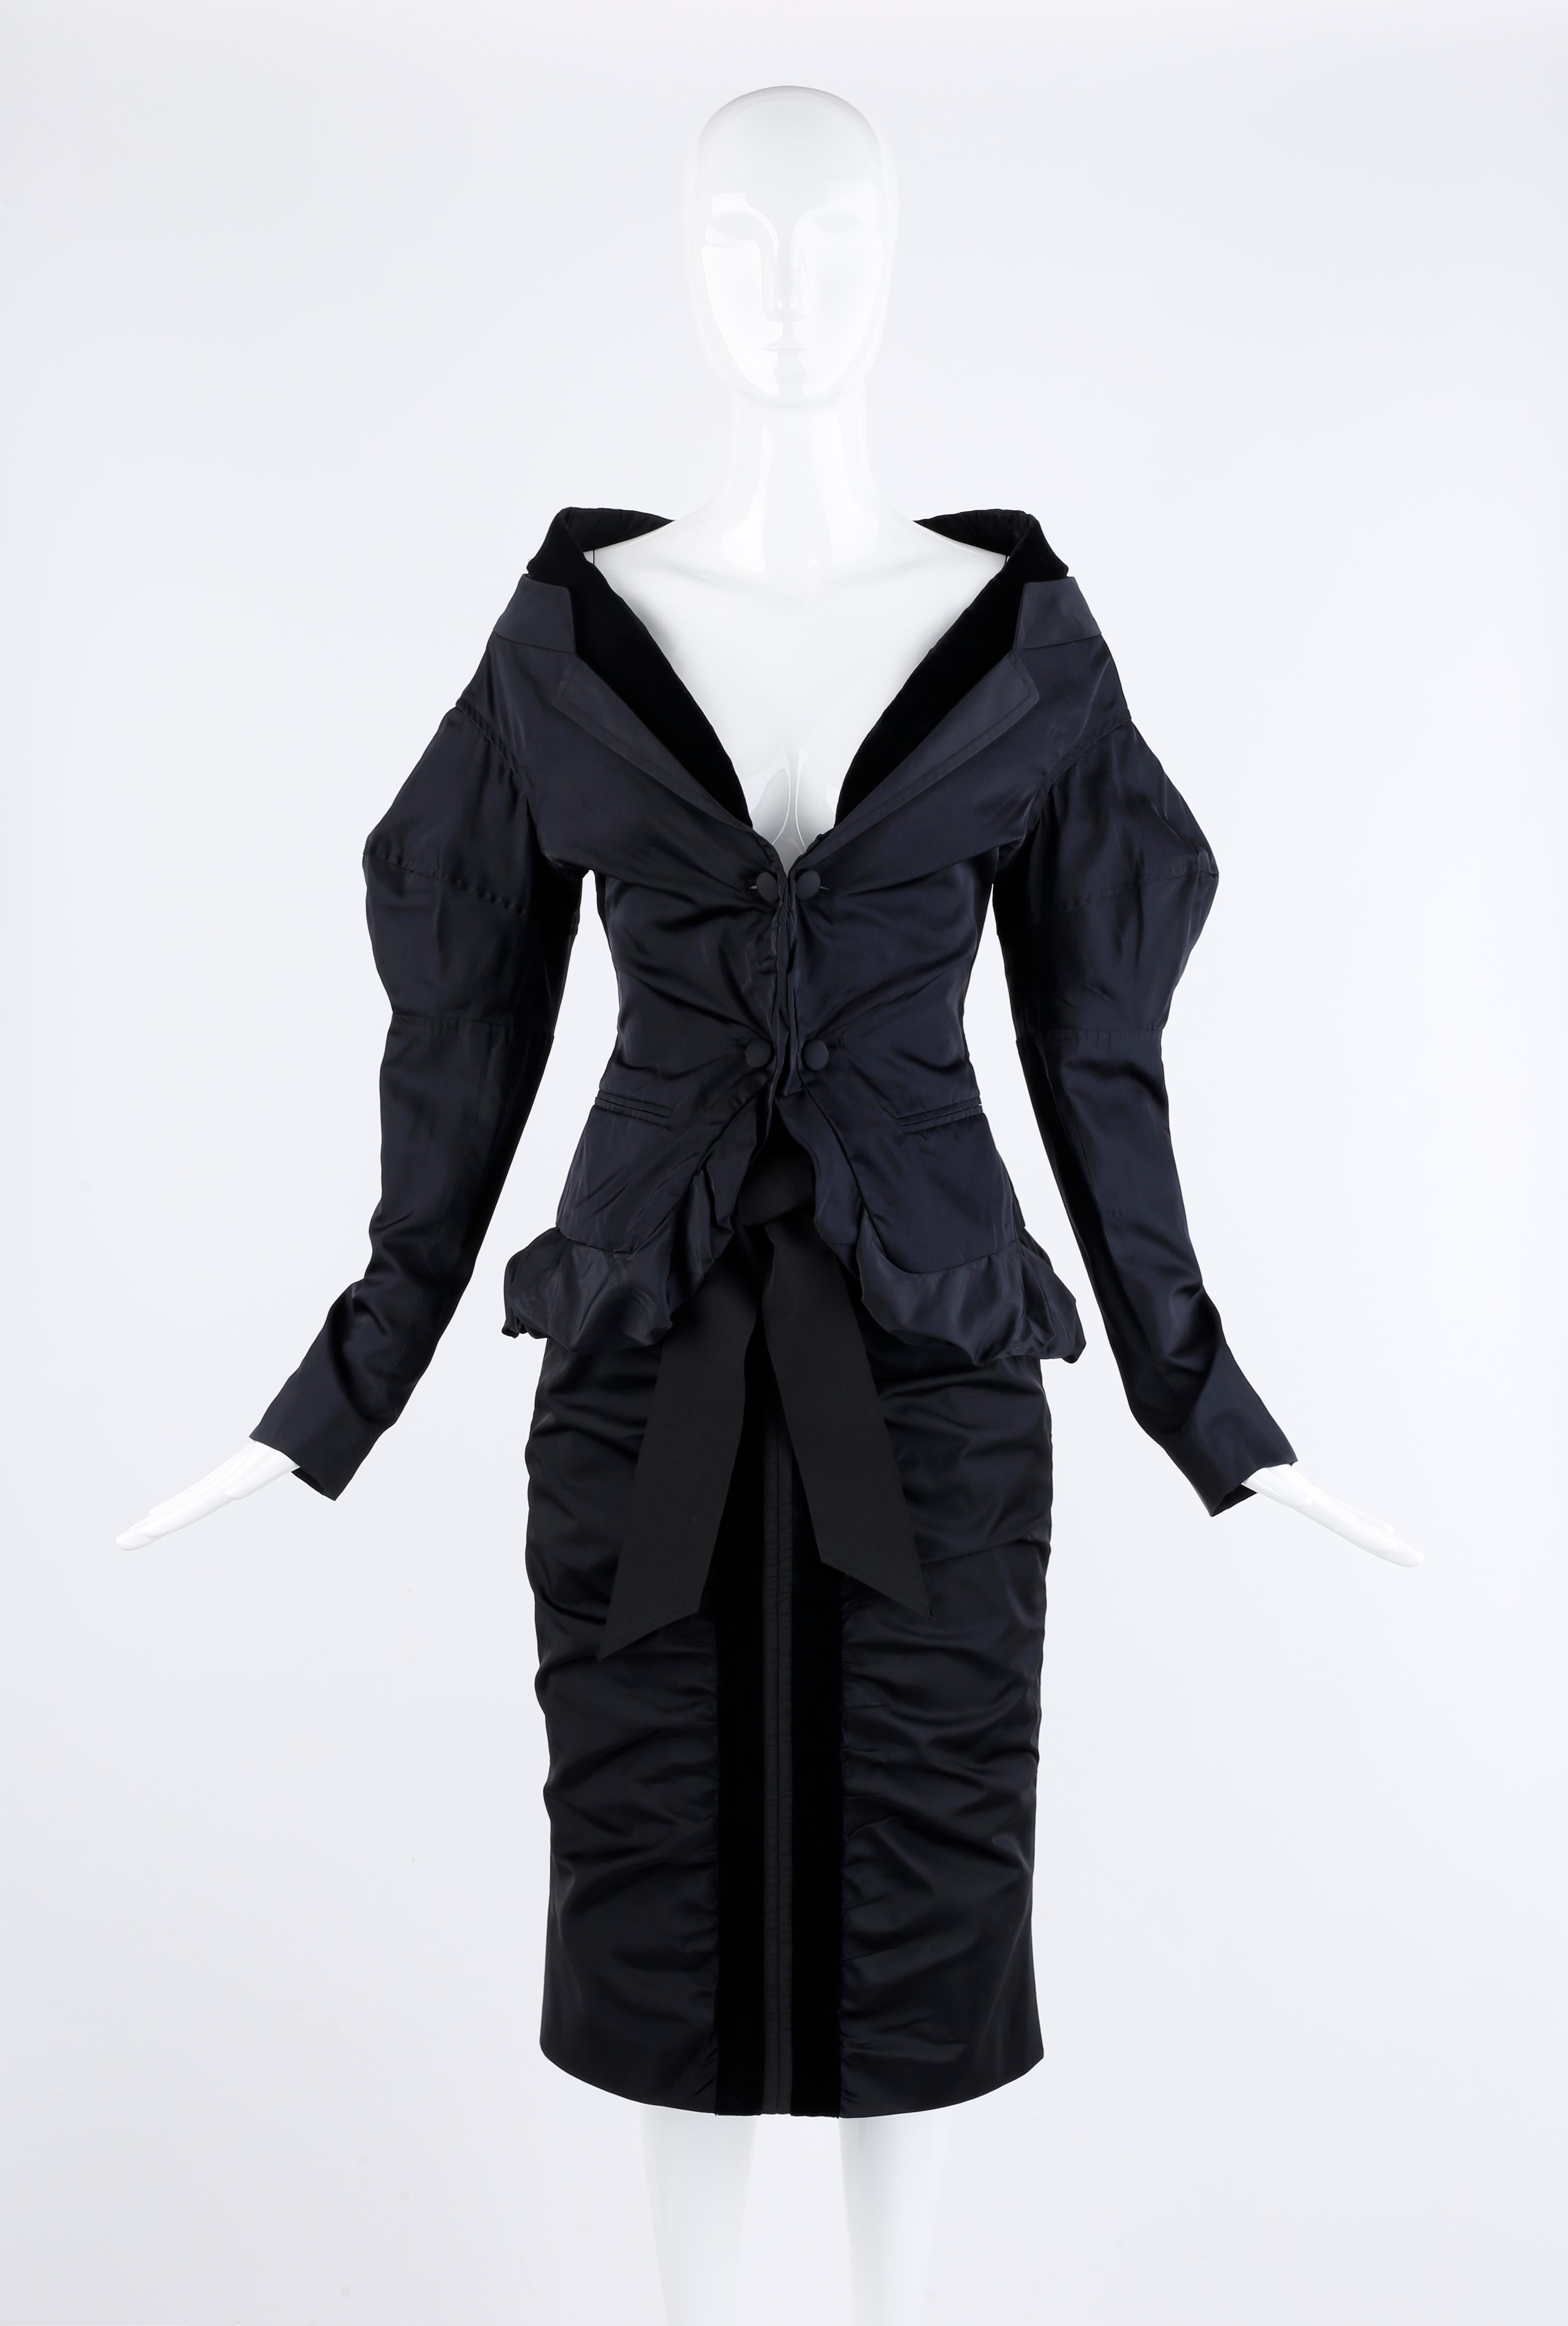 Women's Yves Saint Laurent by Tom Ford F/W 2002 Black Silk Evening Jacket & Skirt Suit For Sale